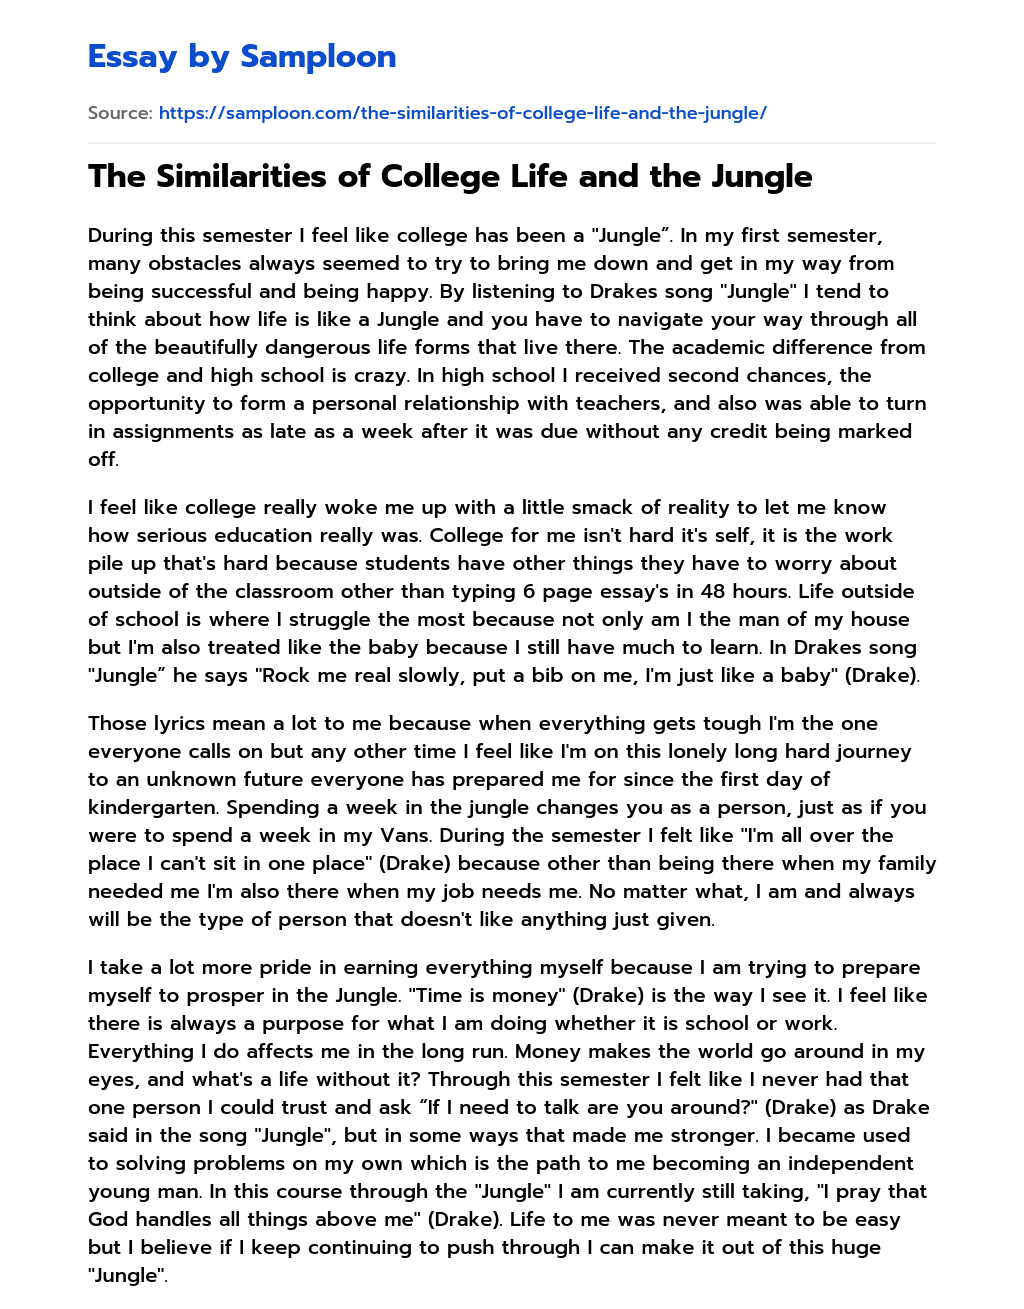 The Similarities of College Life and the Jungle essay